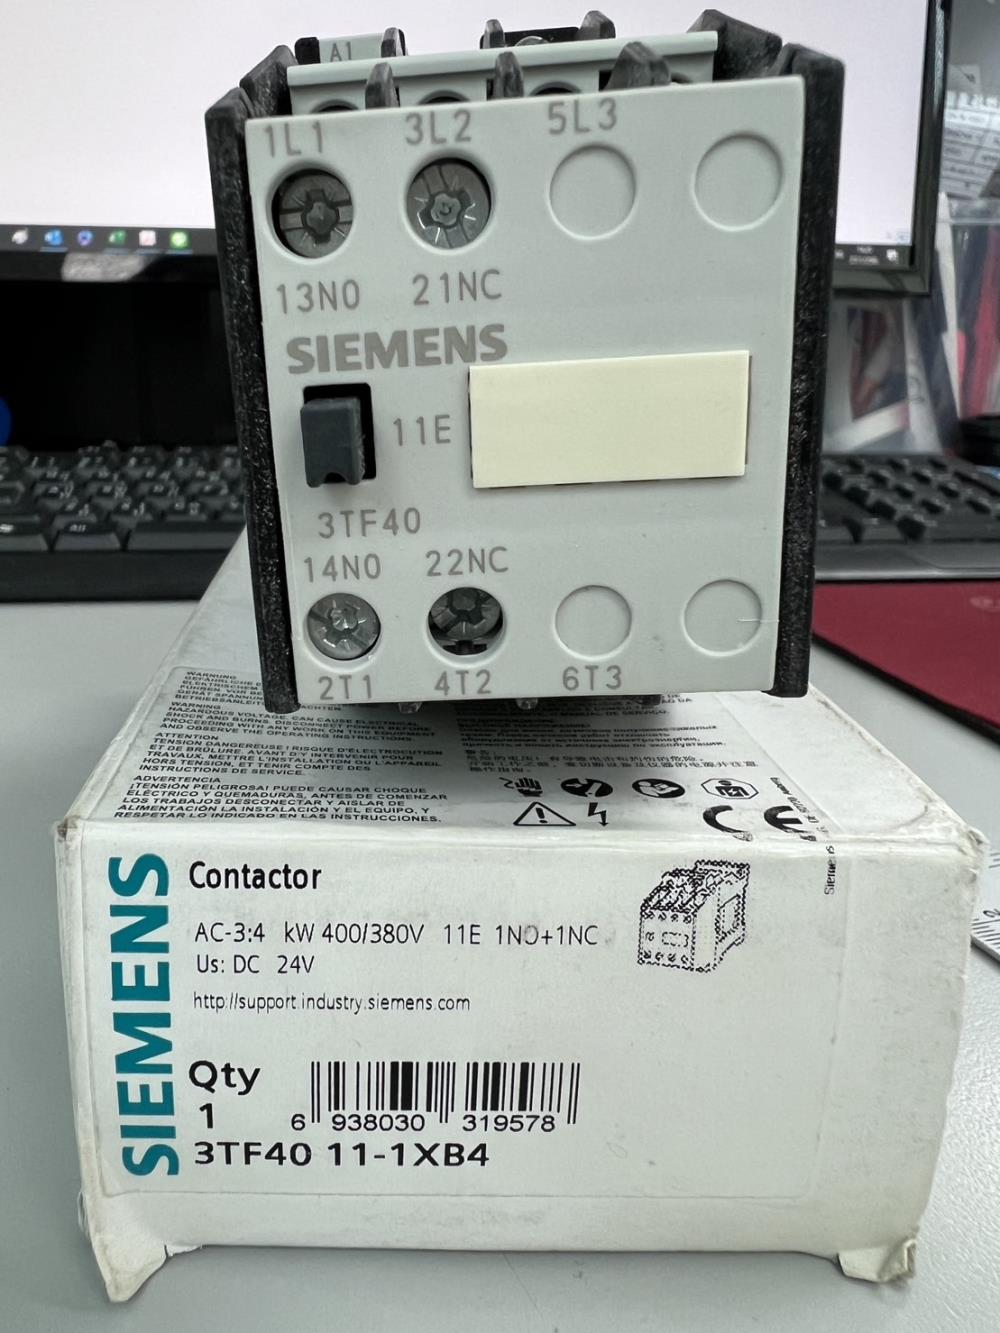 Siemens 3TF4011-1XB4 Contactor,Siemens 3TF4011-1XB4 Contactor Contactor AC-3:4 kW 400/380V 11E 1 NO + 1 NC Us: DC 24 ,Siemens 3TF4011-1XB4 Contactor,Automation and Electronics/Access Control Systems